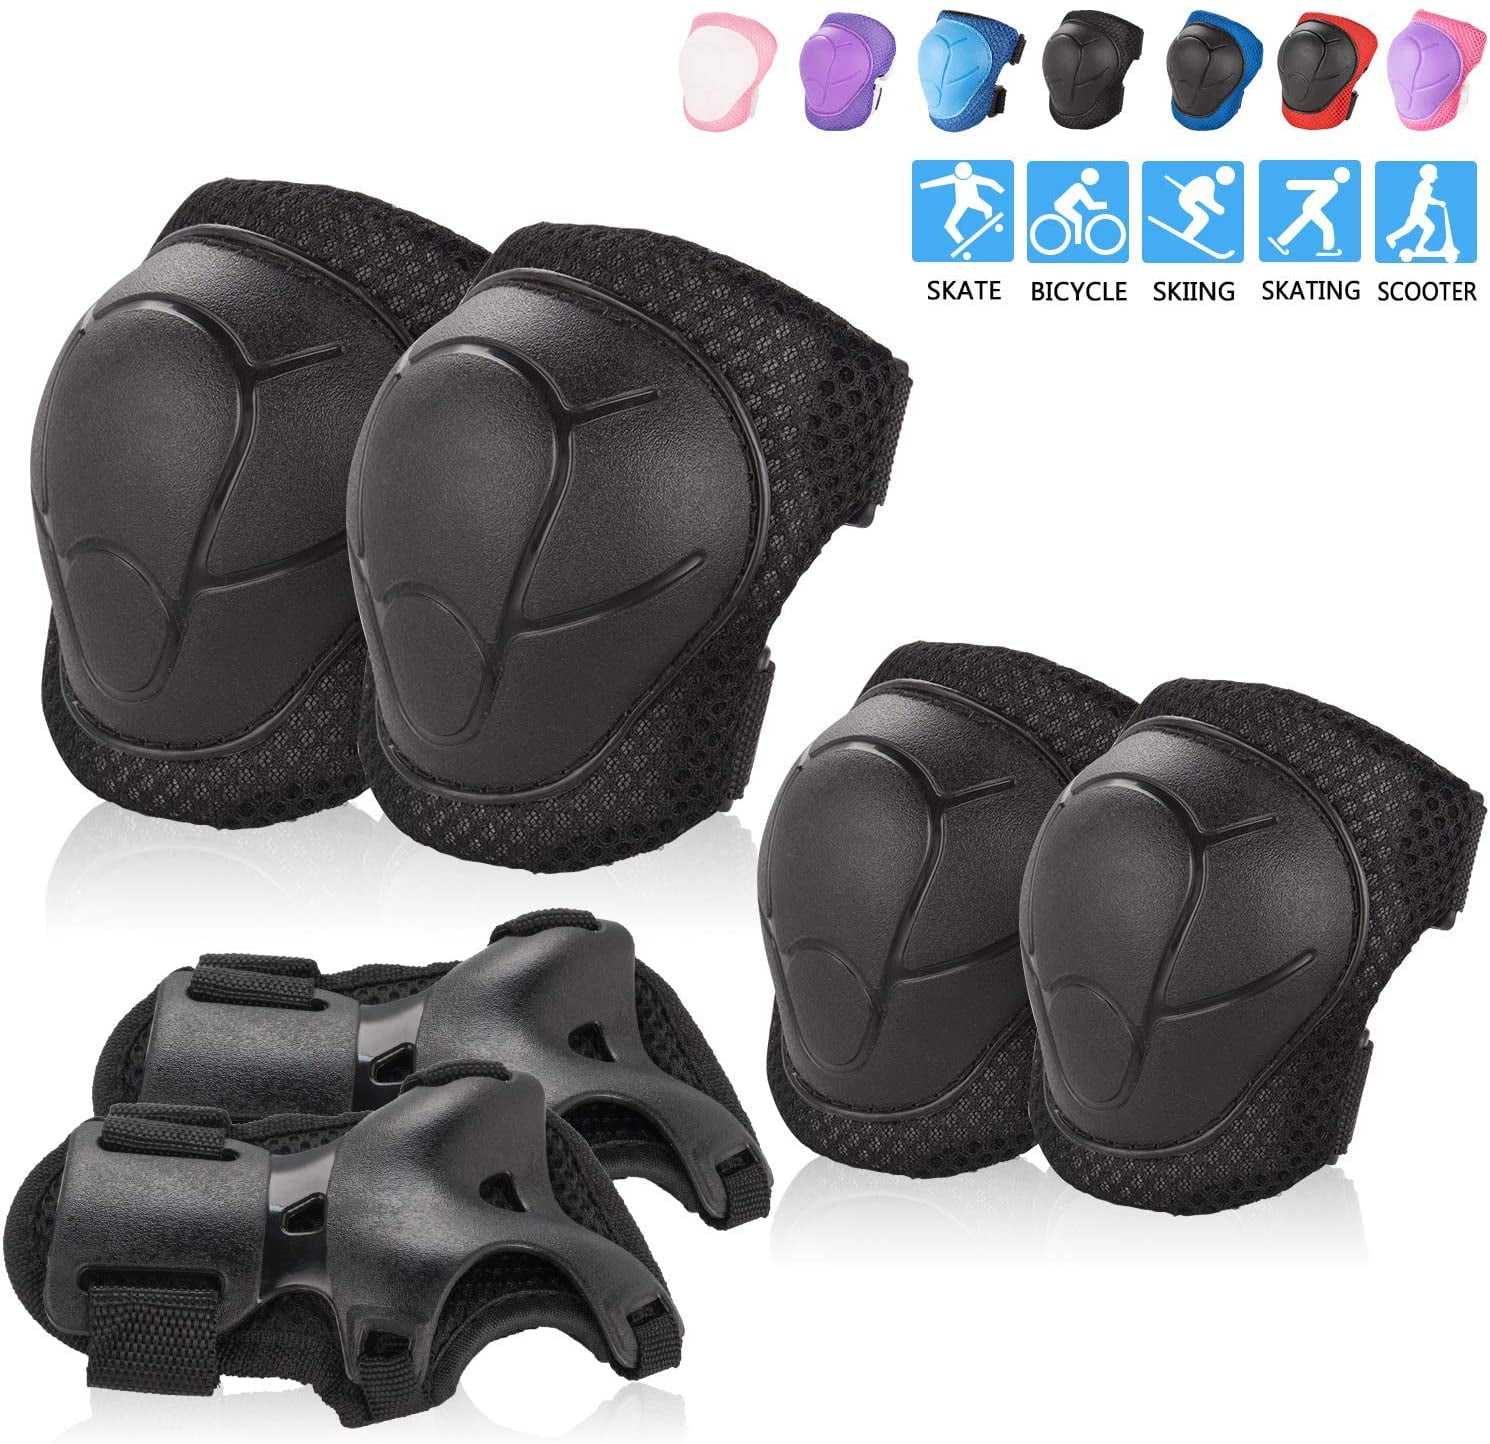 Knee pads+Elbow pads+wrist pads Skyrocket Boys Girls Childs Roller Skating Skateboard BMX Scooter Cycling Protective Gear Pads 